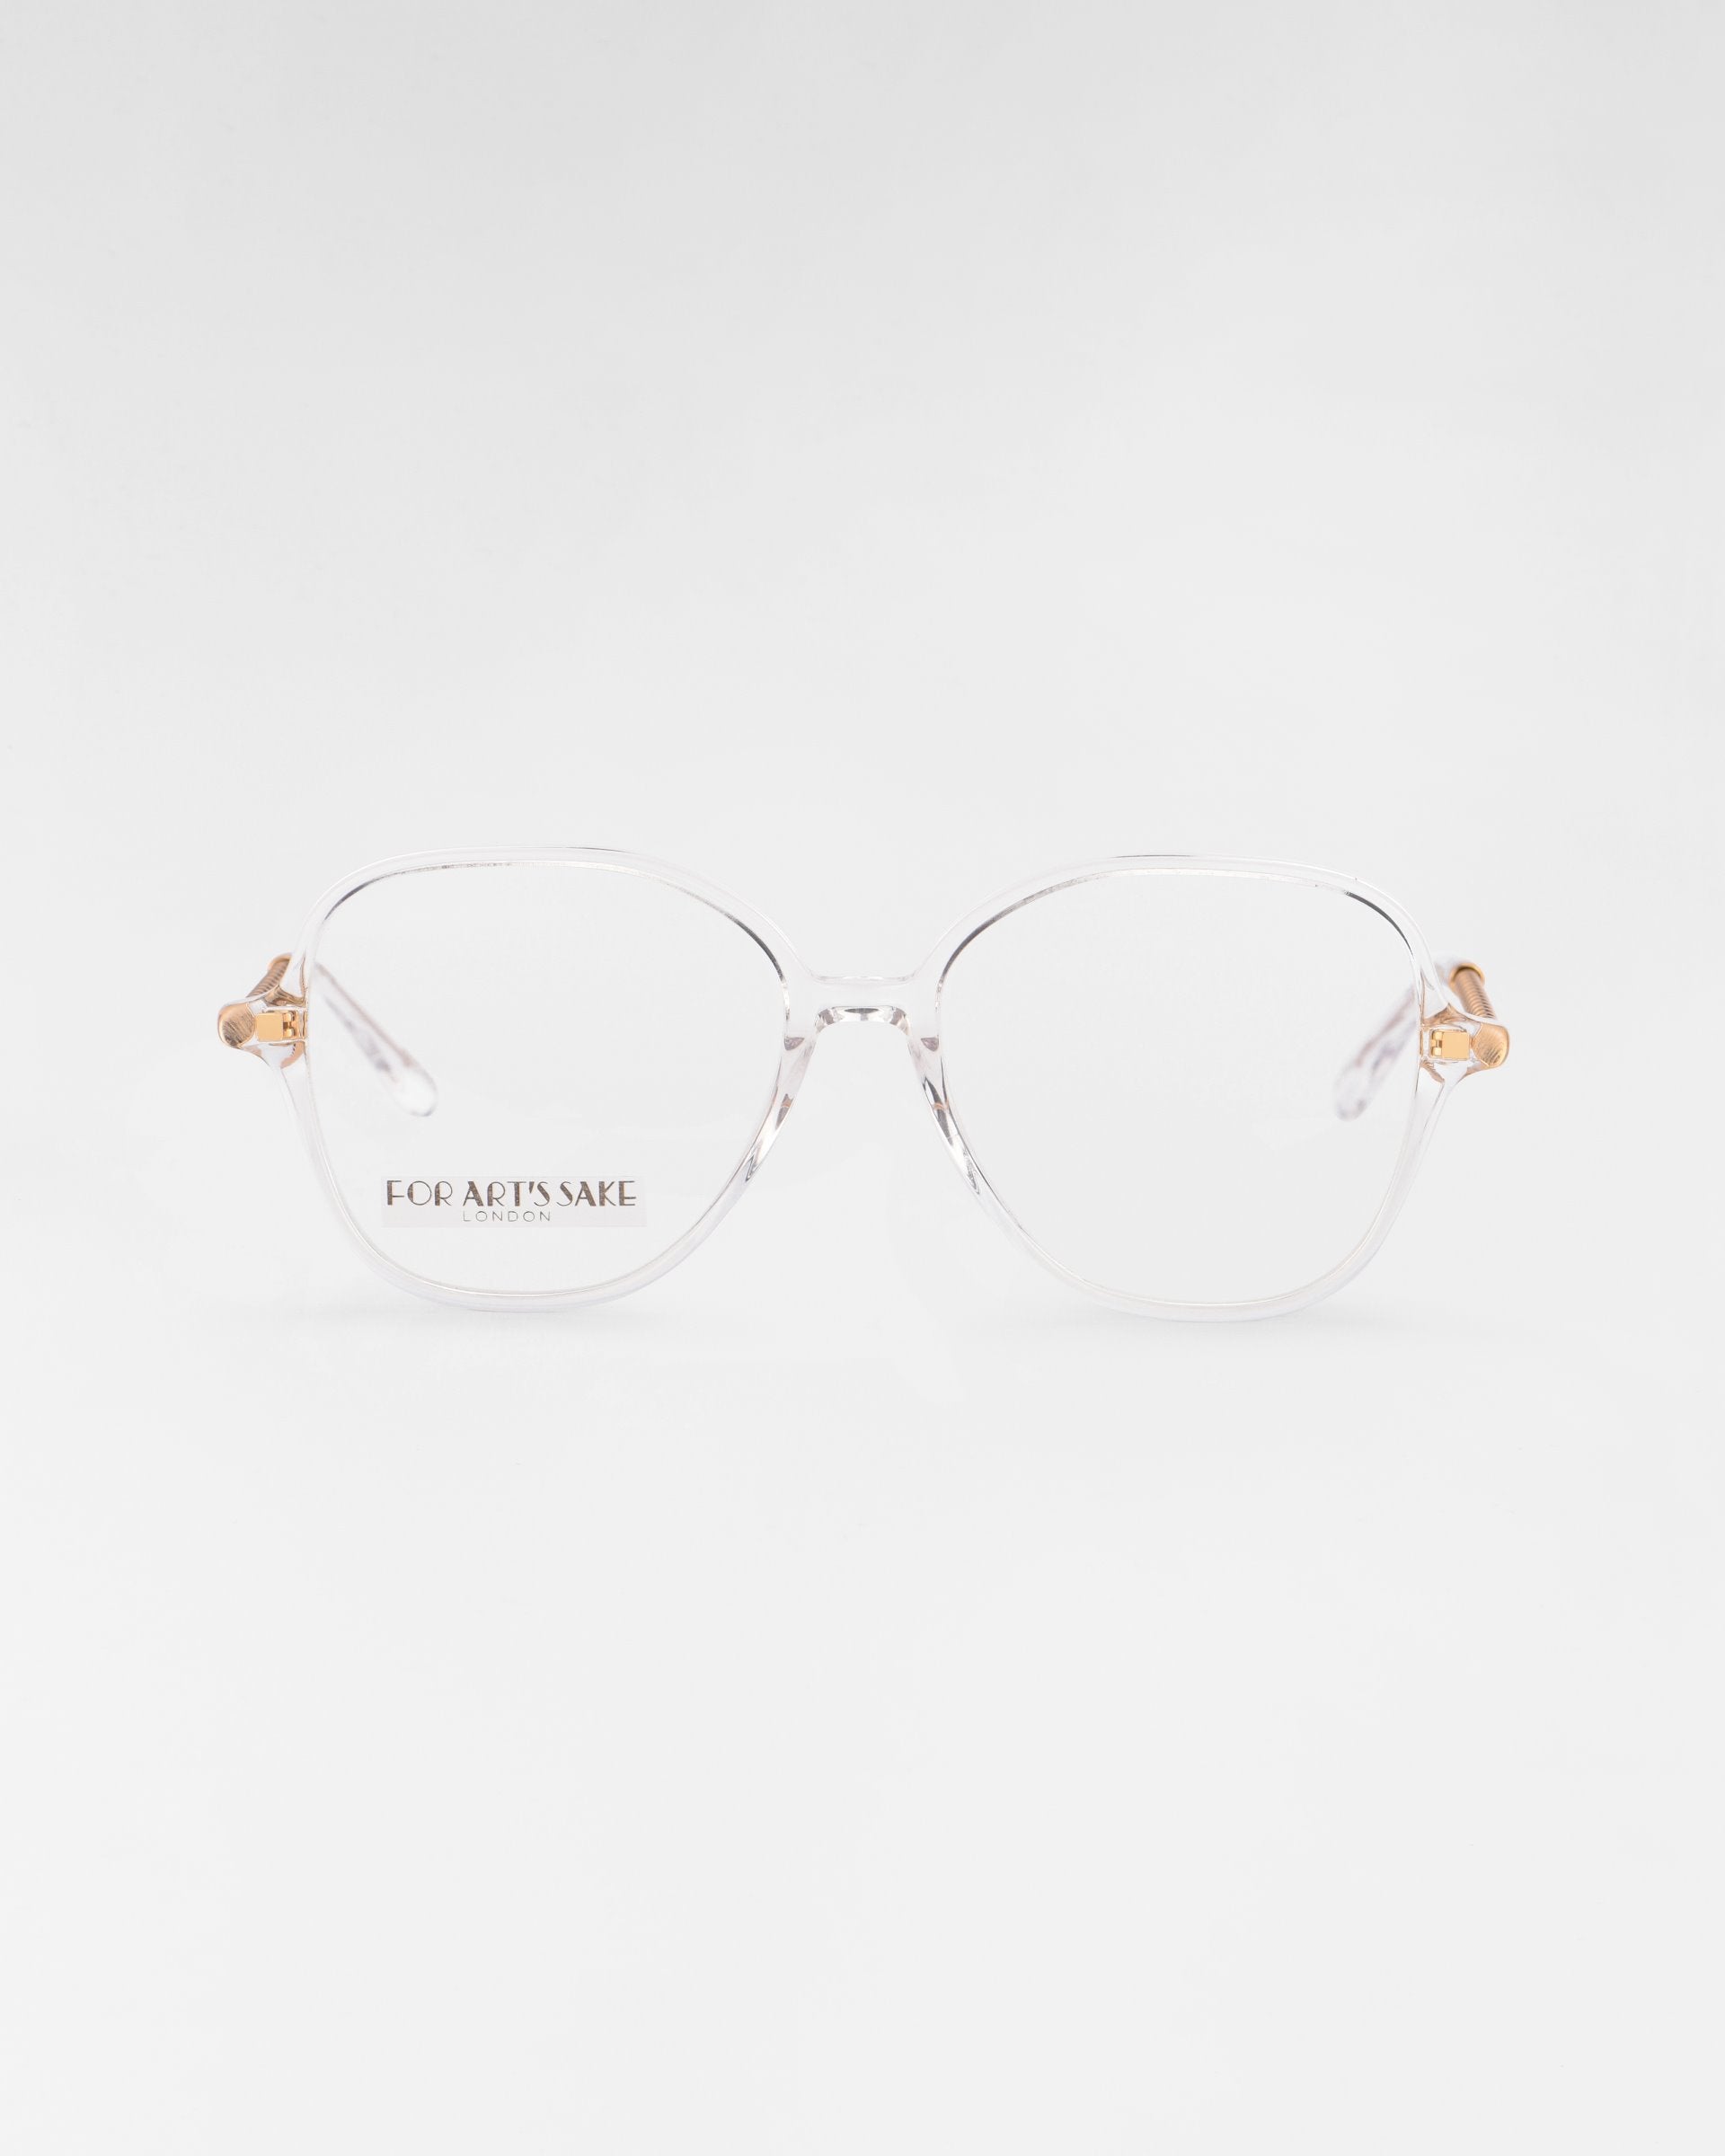 A pair of transparent eyeglasses with a slight hexagonal shape and gold accents on the temples, featuring a blue light filter for added eye comfort. The Dumpling glasses are displayed against a plain white background, with the brand For Art's Sake® visible on the left lens.